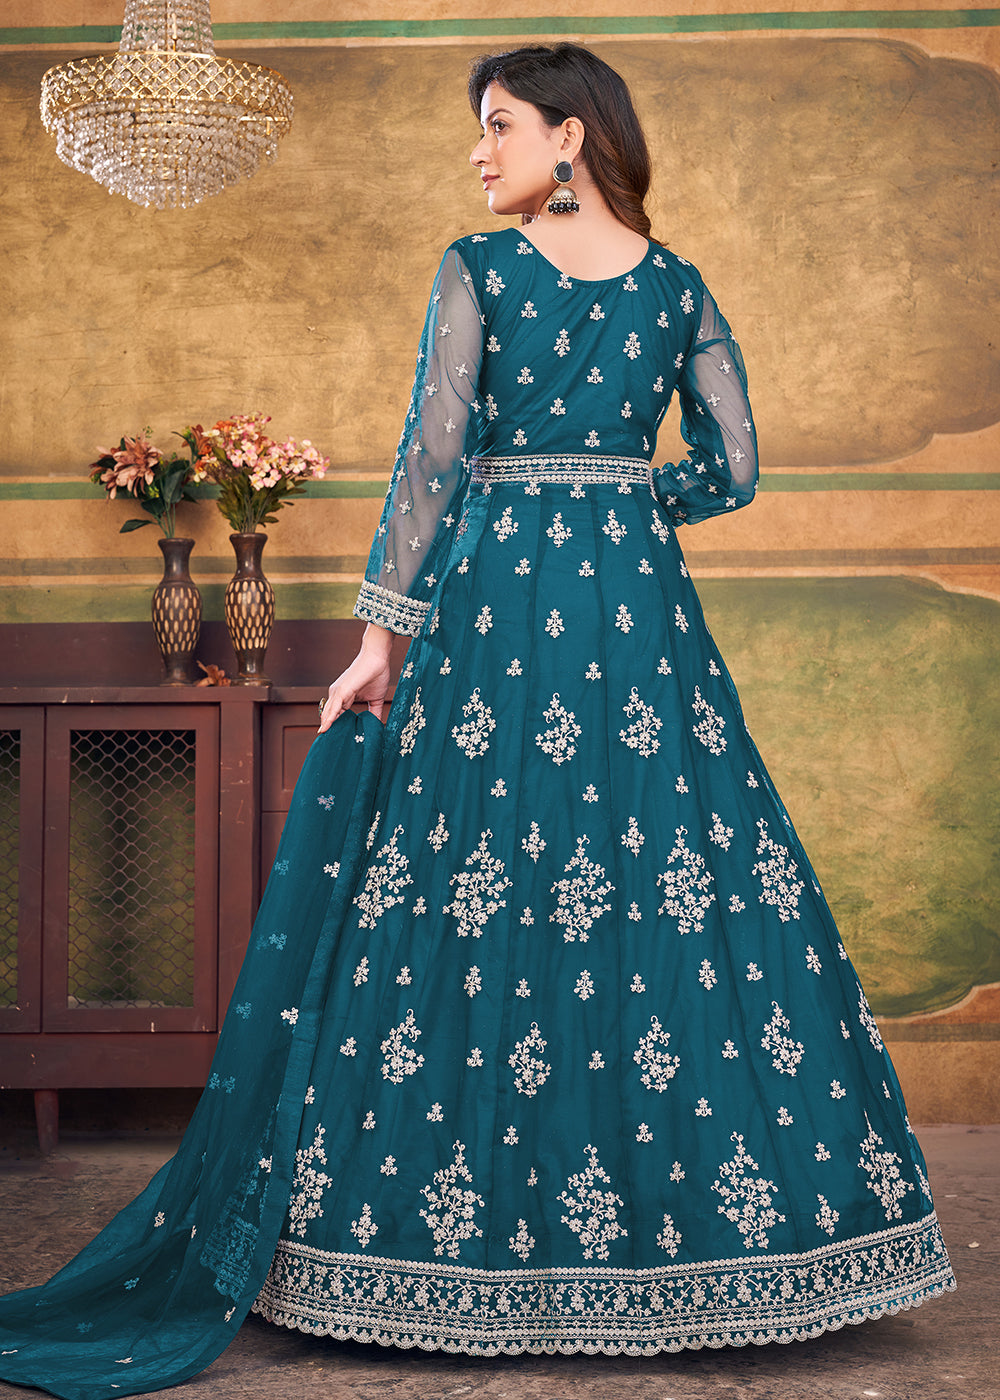 Buy Now Function Look Engaging Teal Blue Net Anarkali Suit Online in USA, UK, Australia, New Zealand, Canada, Italy & Worldwide at Empress Clothing. 